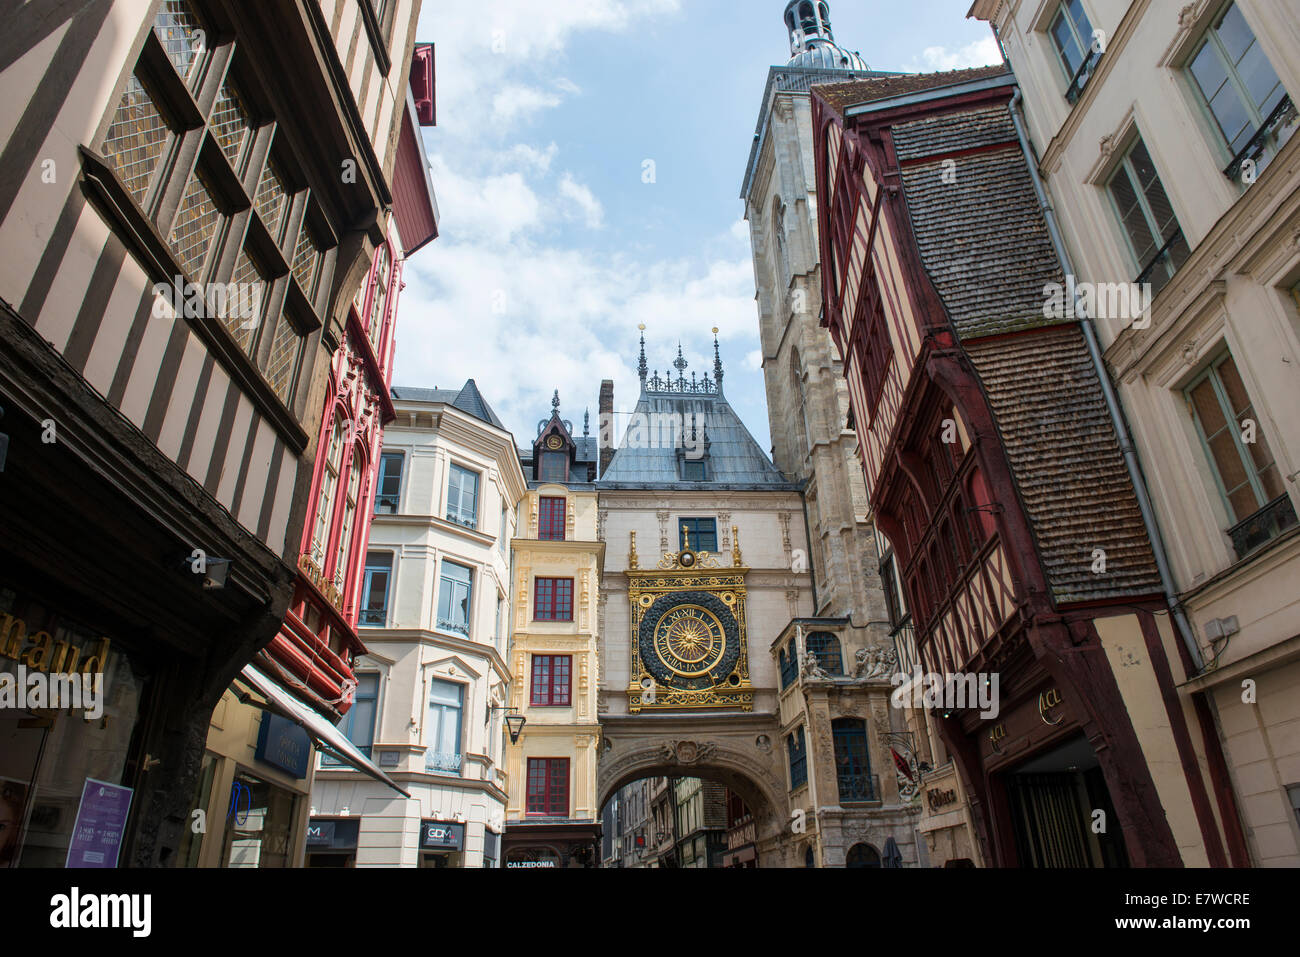 Historic timber framed buildings in Rouen, France Europe Stock Photo